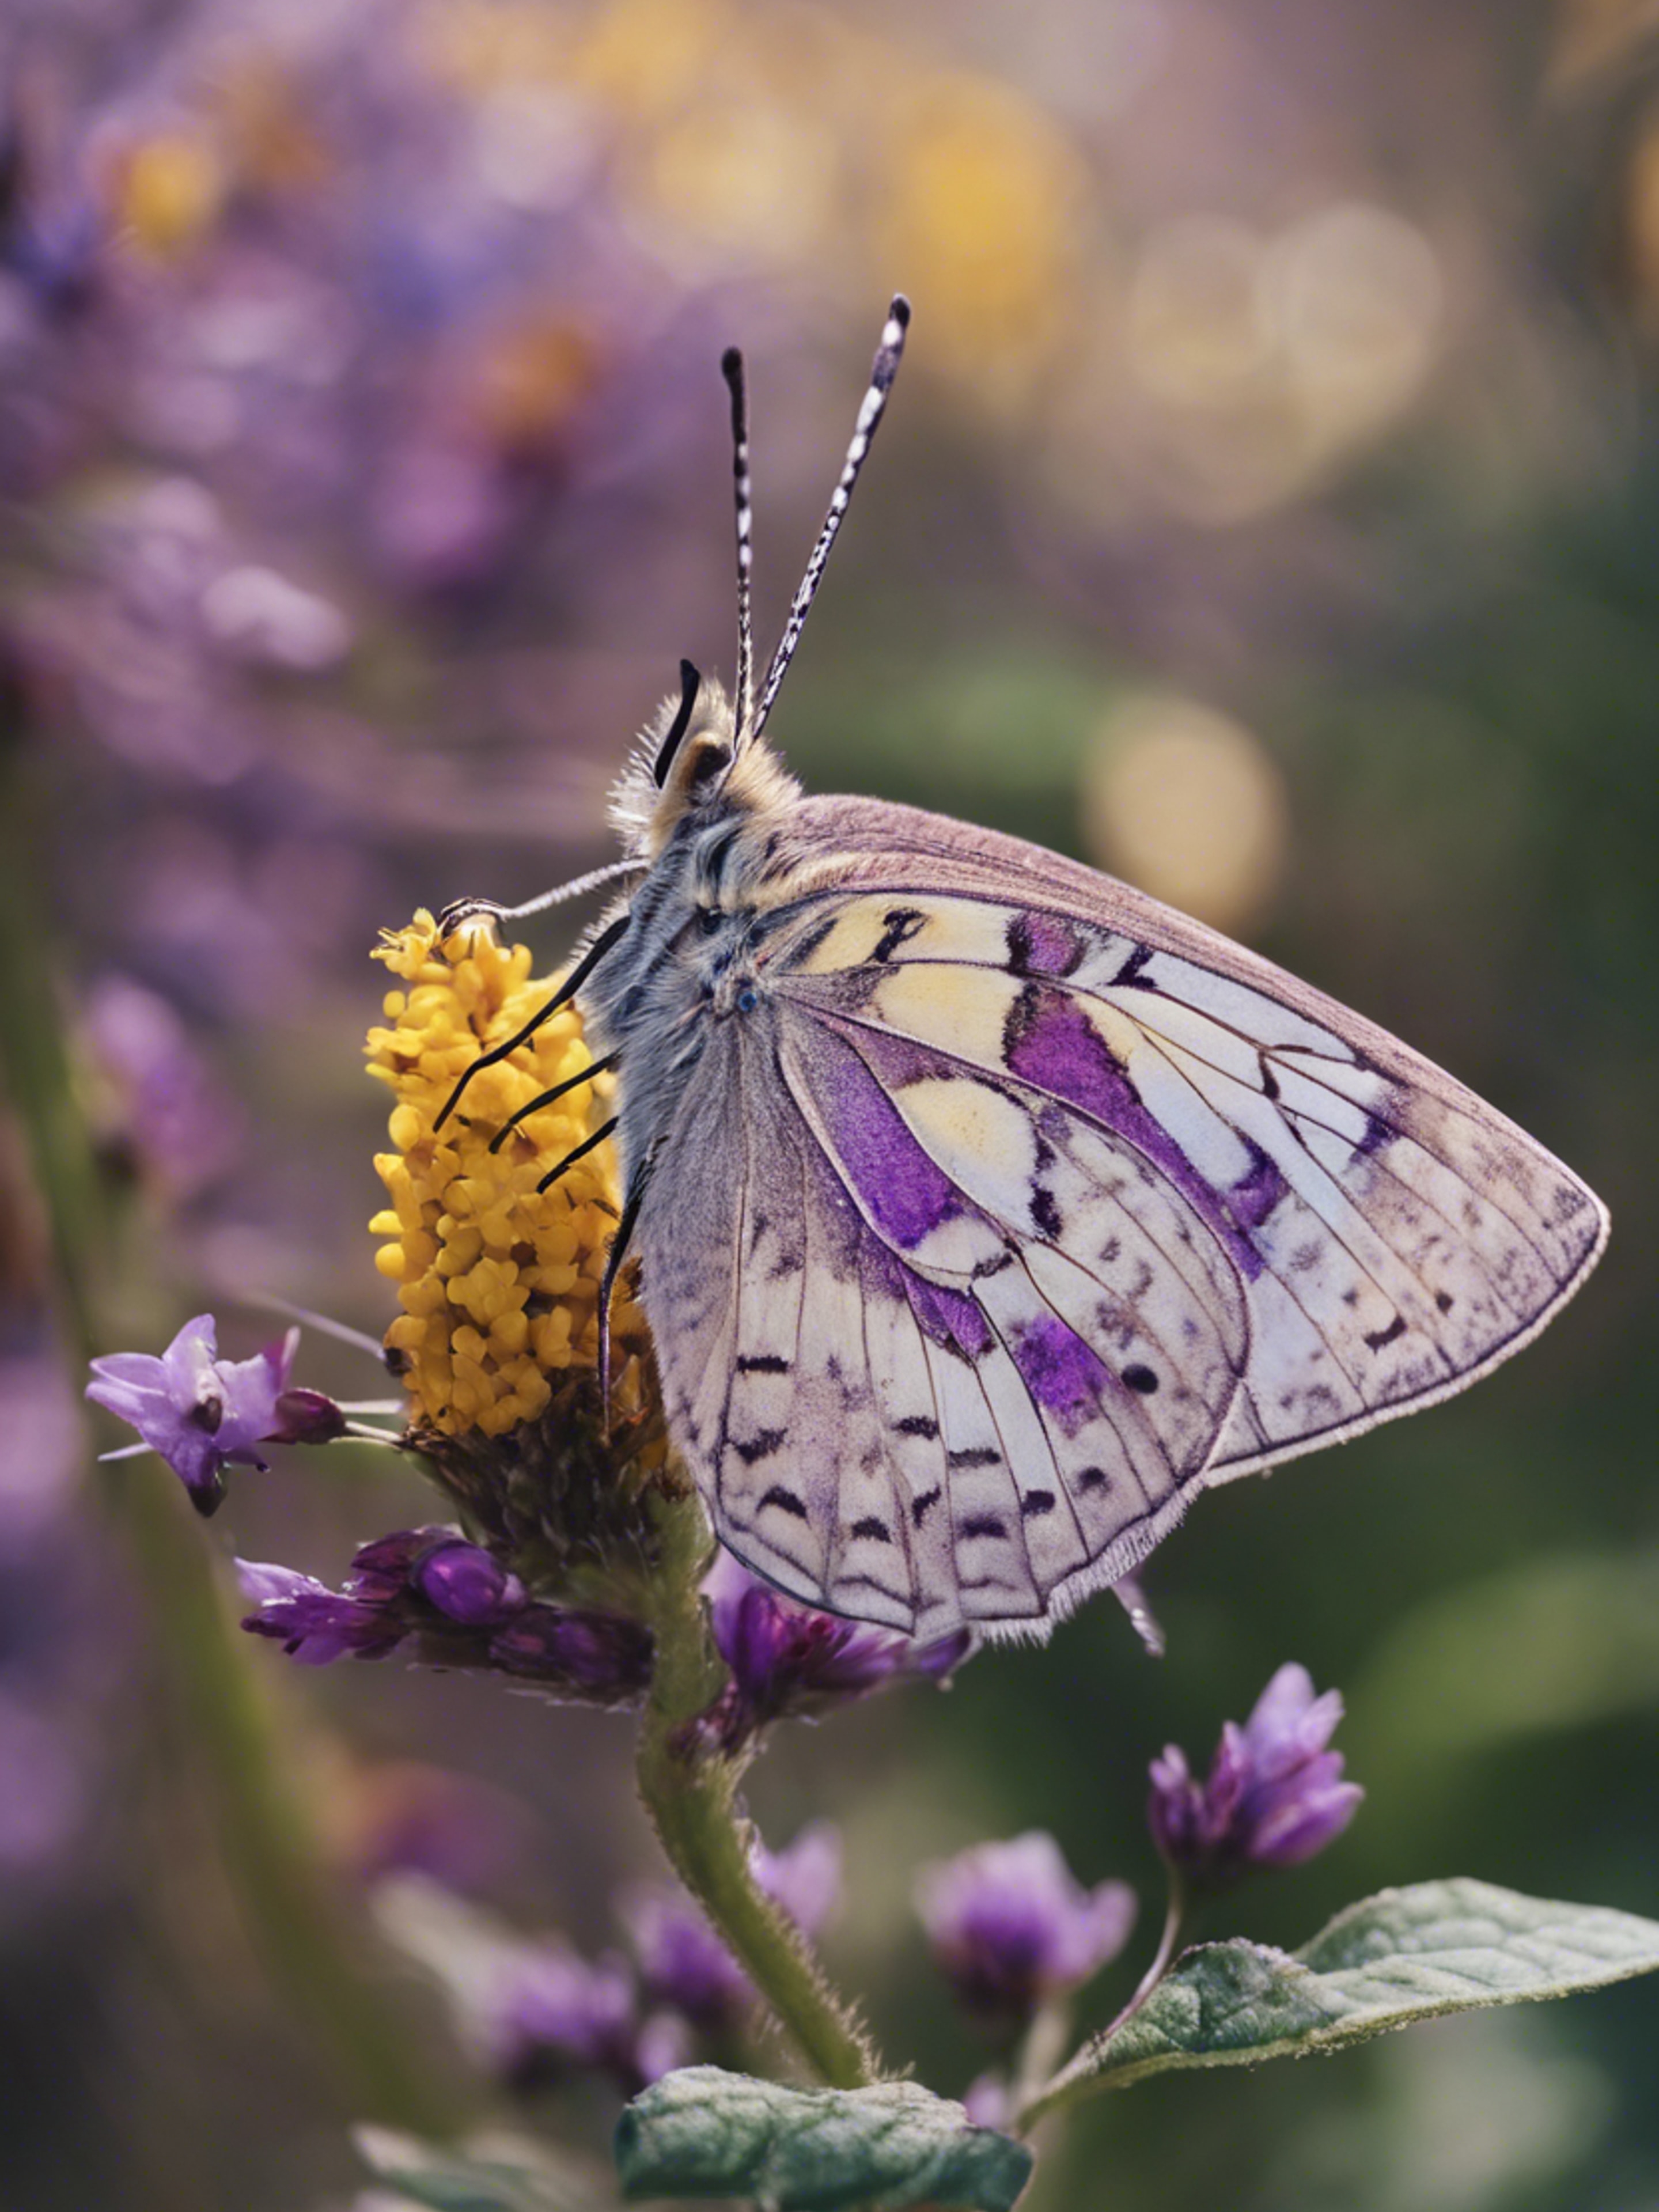 A beautiful butterfly with detailed purple and yellow wings resting on a blooming flower. Tapeta[3e976ae7be264a5da695]